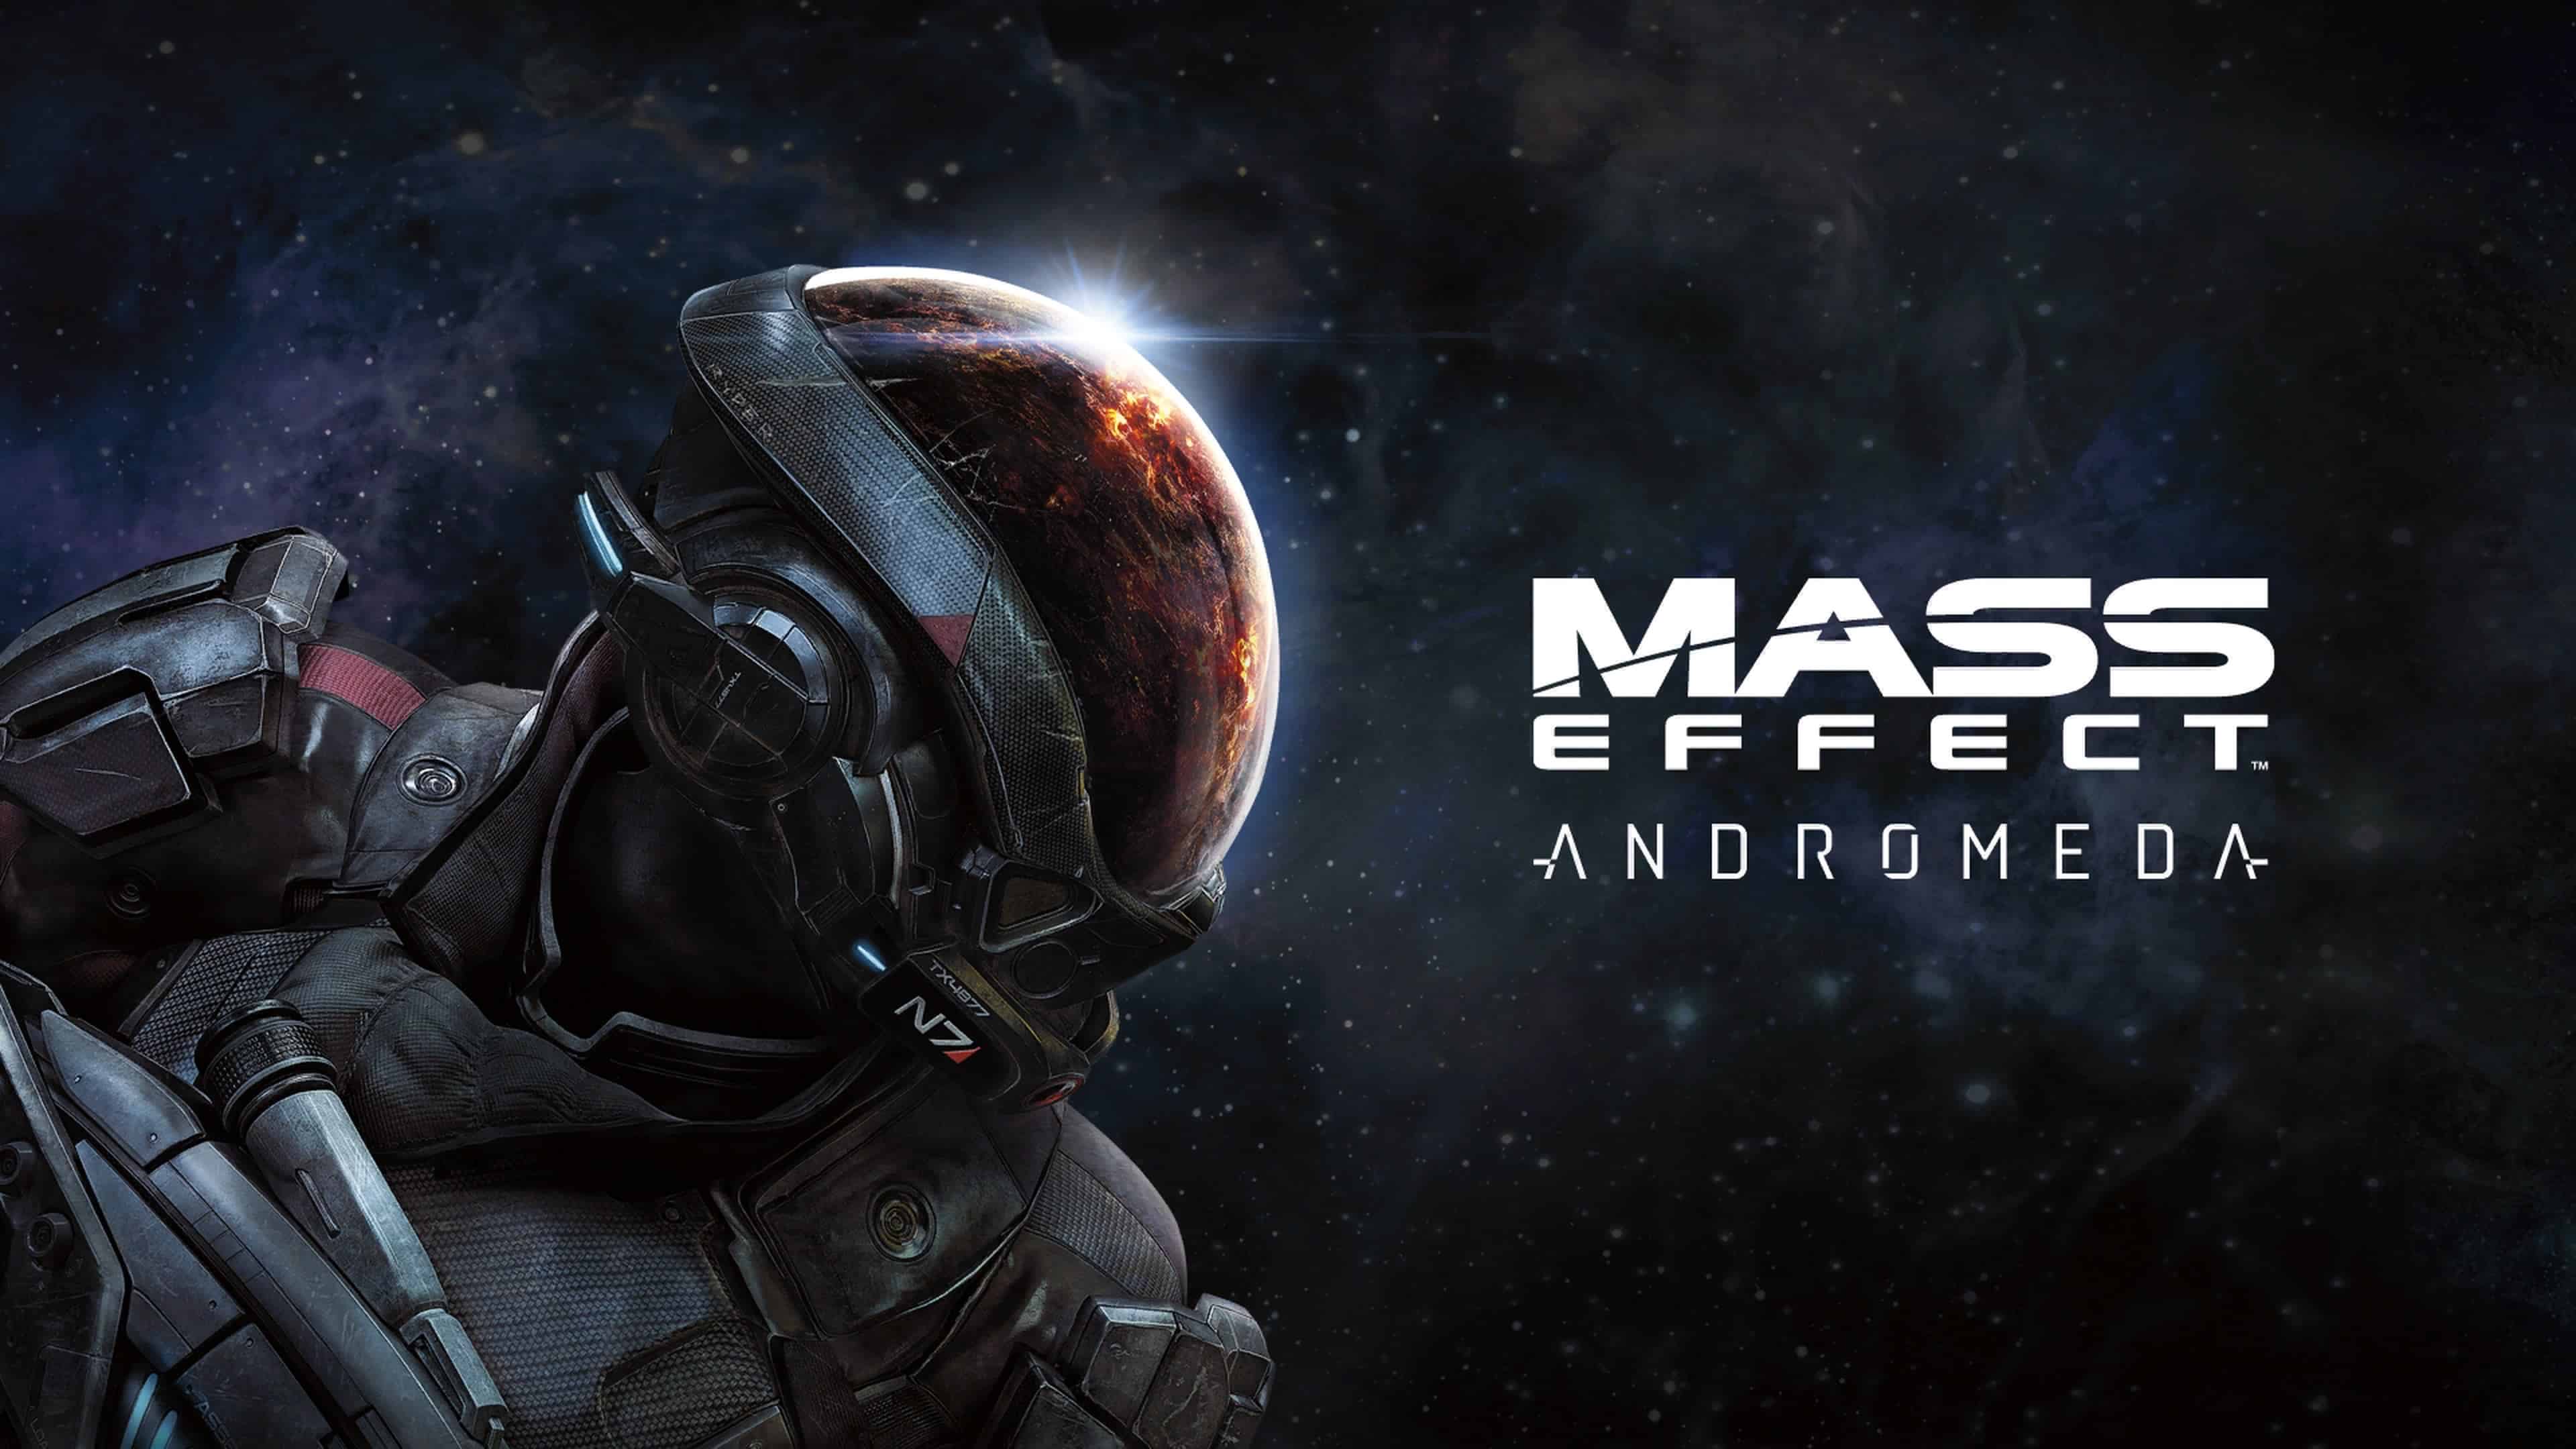 Mass Effect: Andromeda Deluxe Edition (PC Digital Download) $6